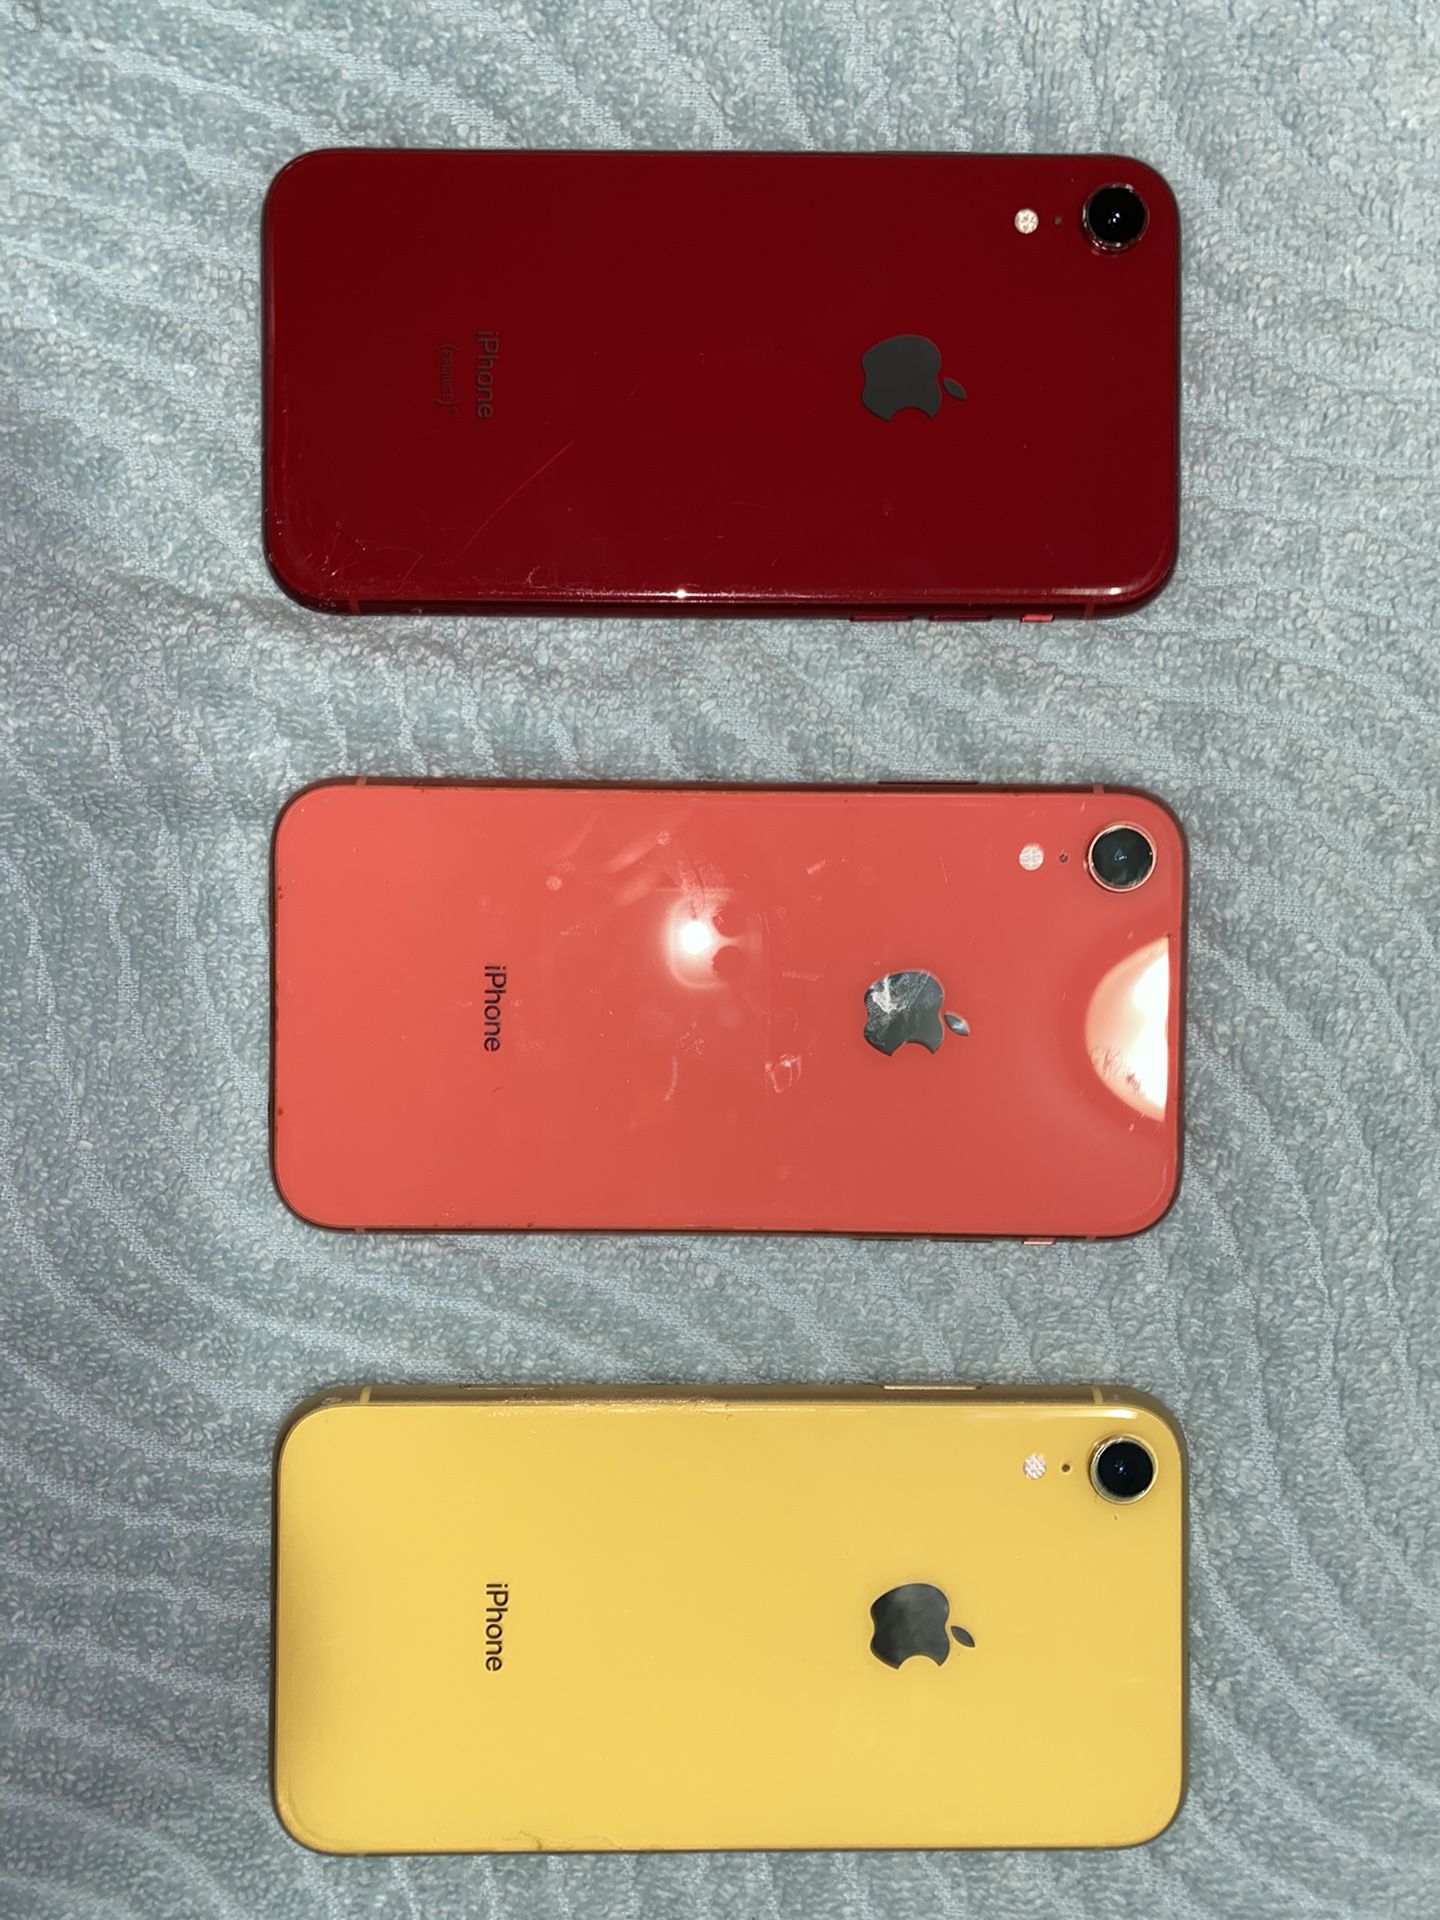 3 IPHONE XR’s all AT&T